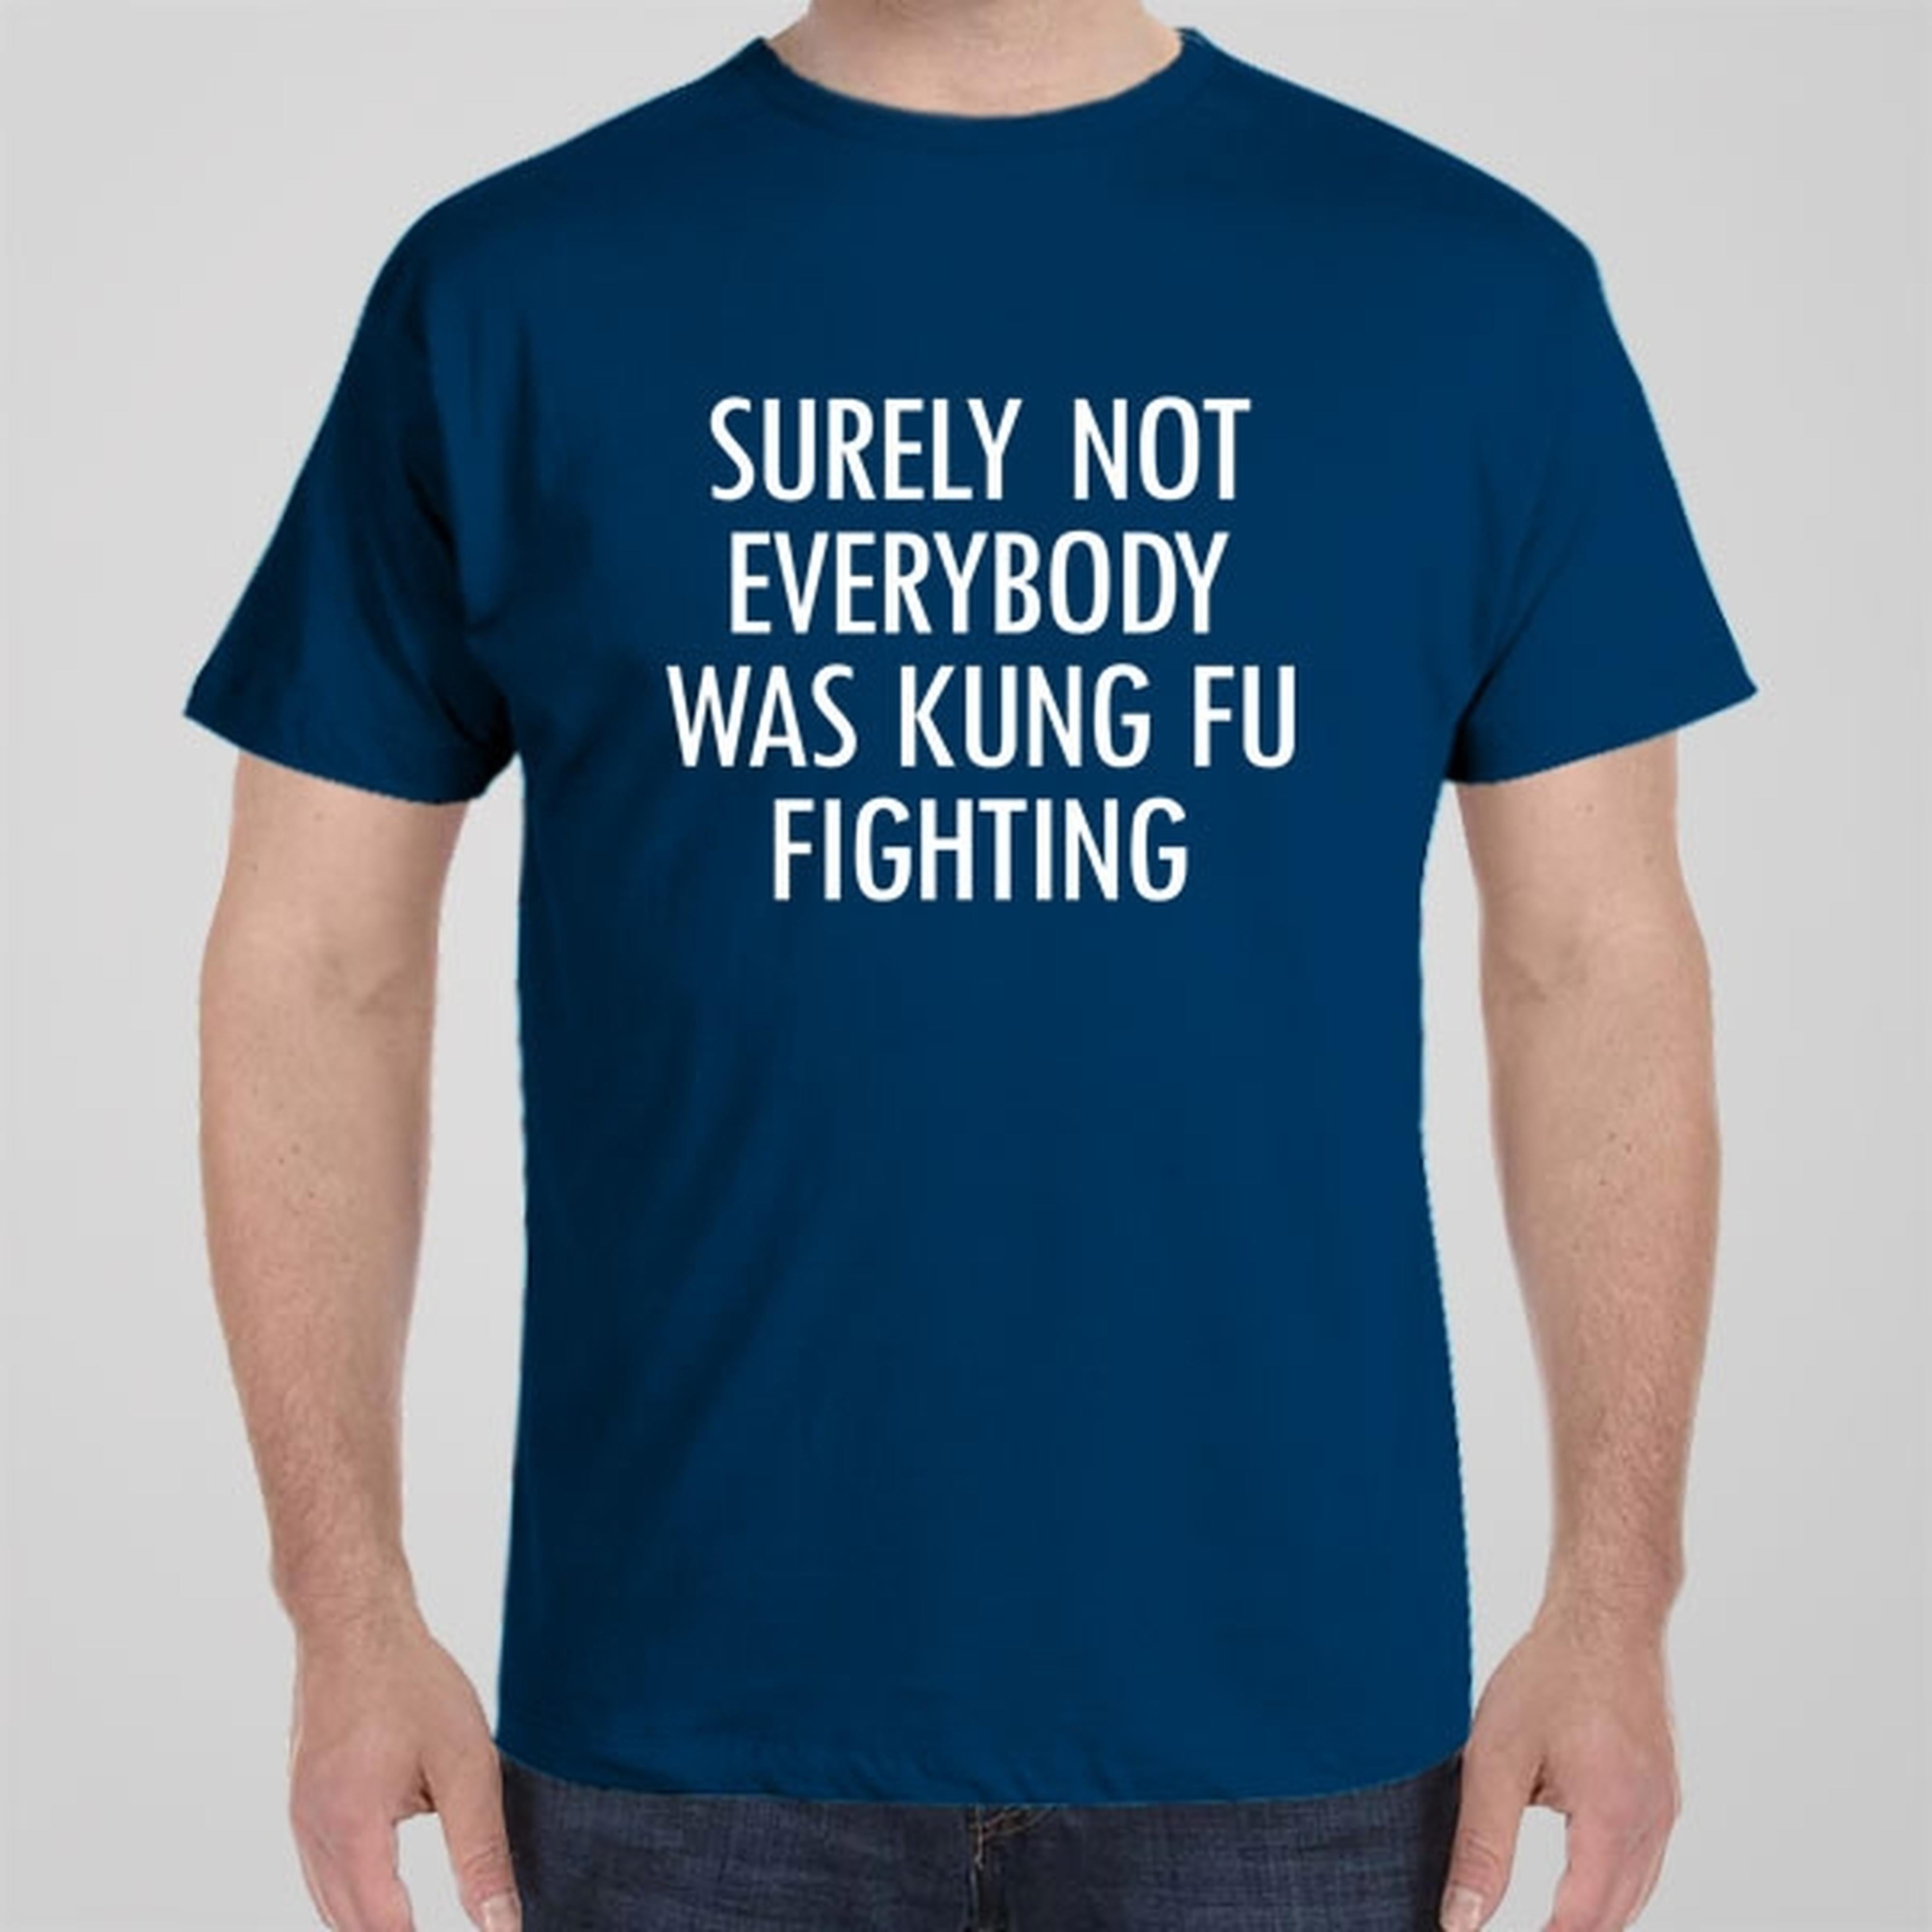 surely-not-everyone-was-kung-fu-fighting-t-shirt